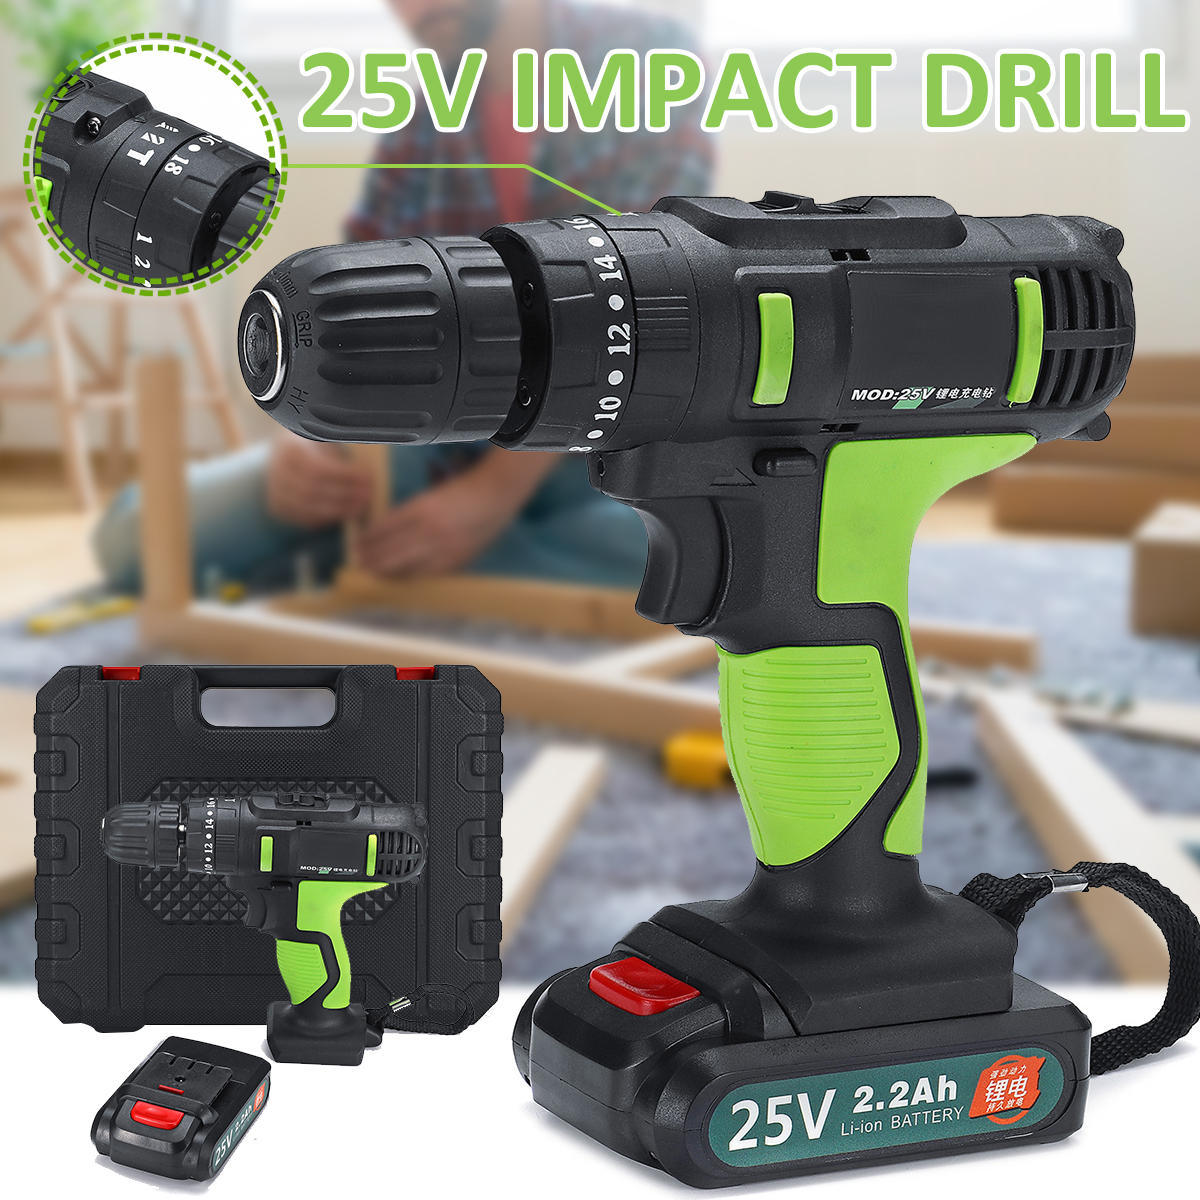 3-in-1-25V-Cordless-Impact-Drill-Double-Speed-Electric-Screwdriver-Li-ion-Battery-Rechargable-Drill-1371313-2